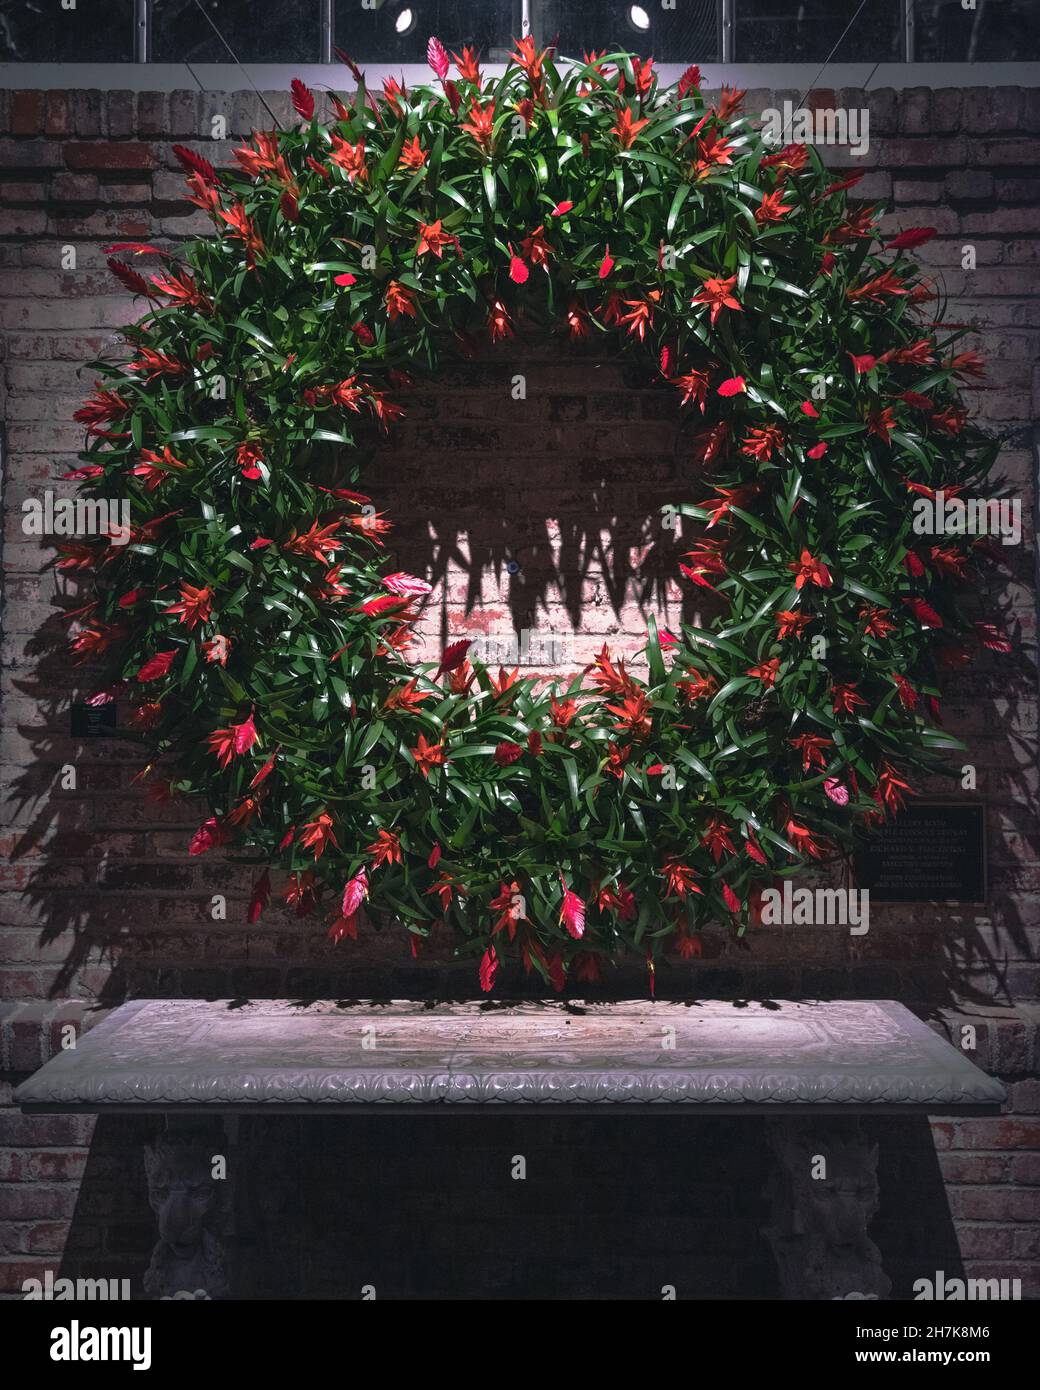 Vertical shot of an indoor decoration made of Begonia flowers Stock Photo